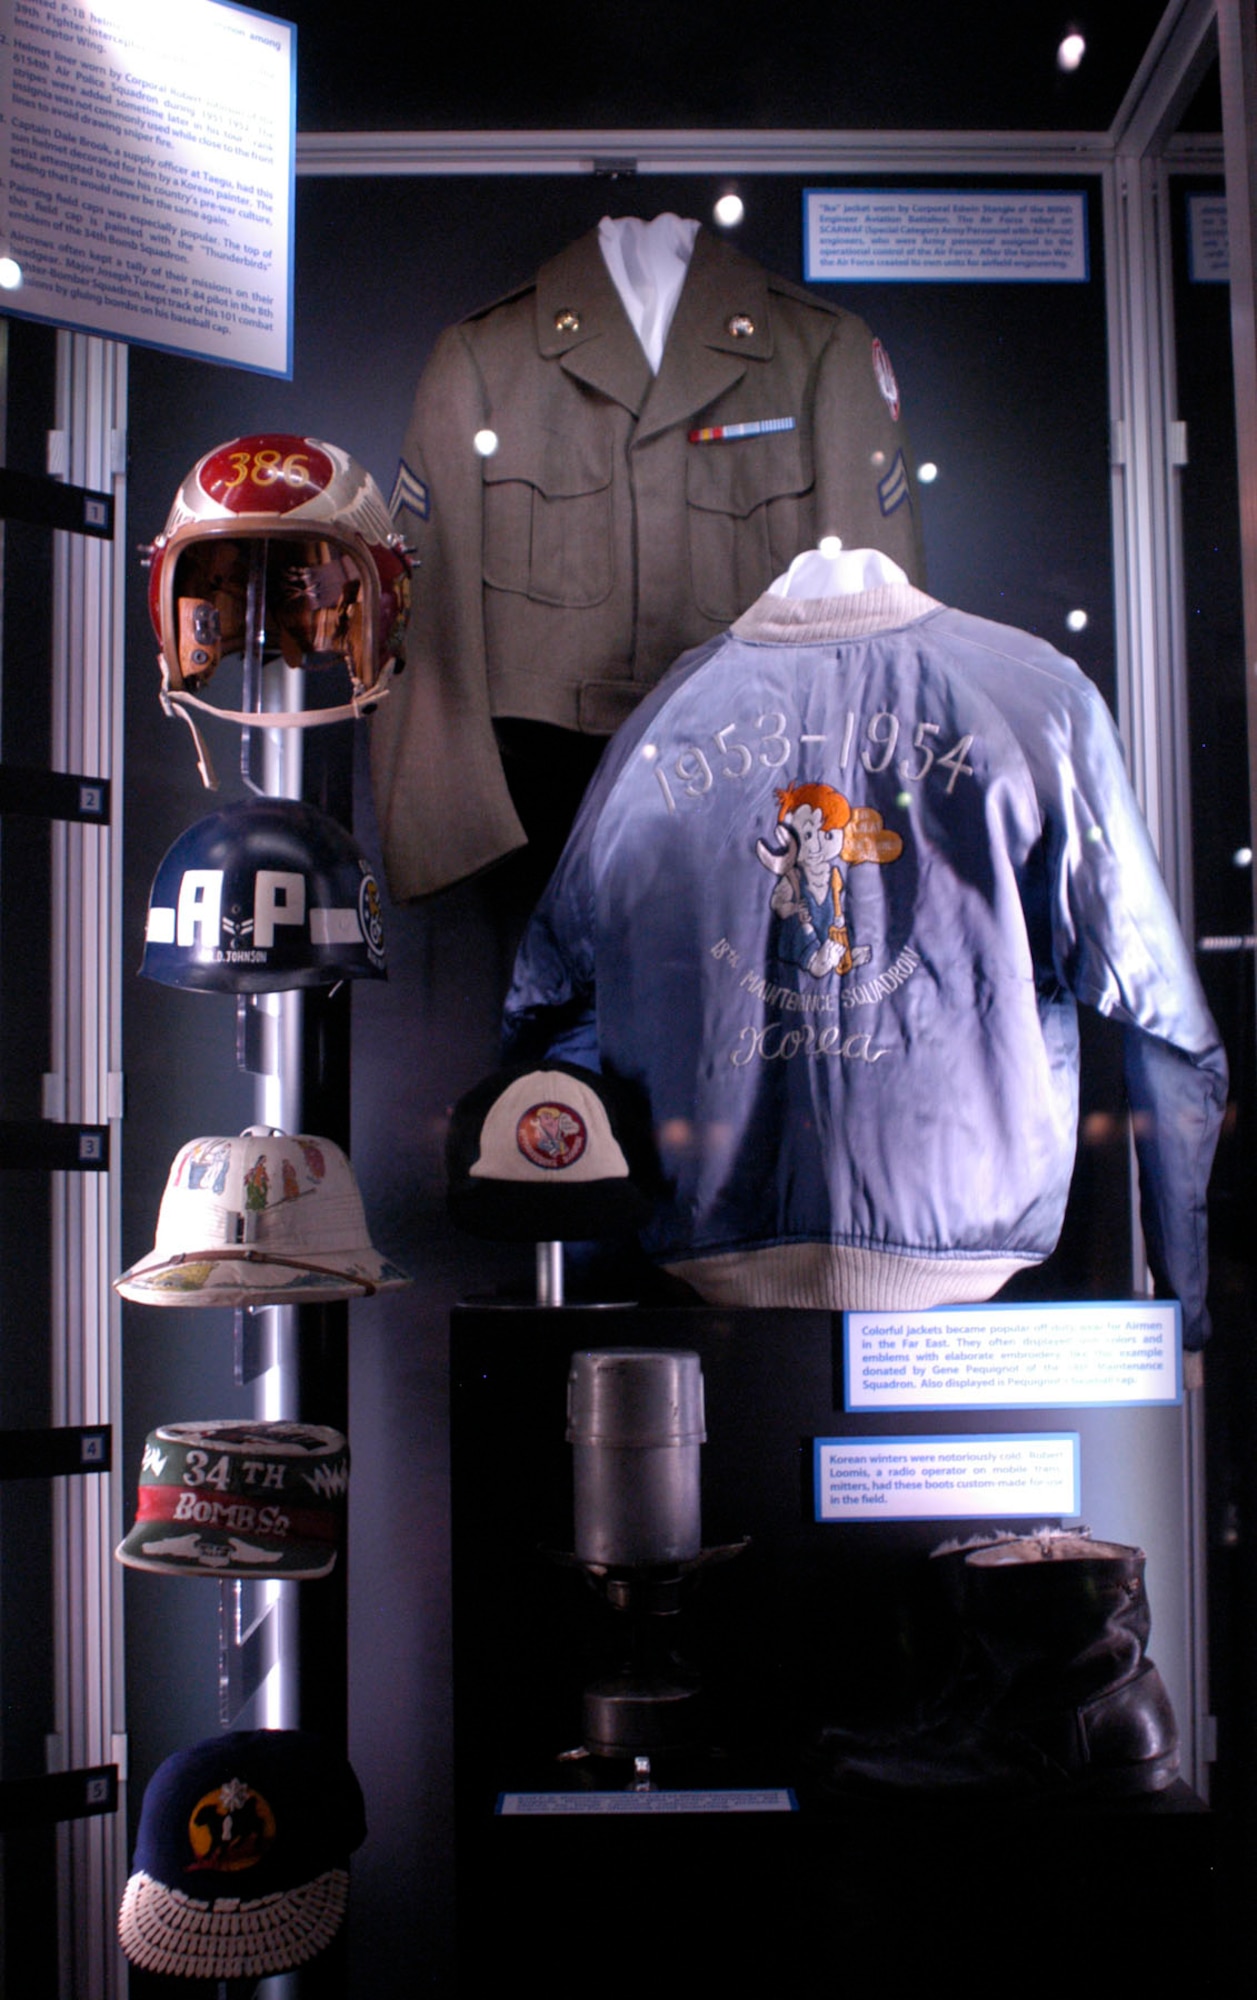 Personalized items worn by U.S. Air Force members during the Korean War. (U.S. Air Force photo).